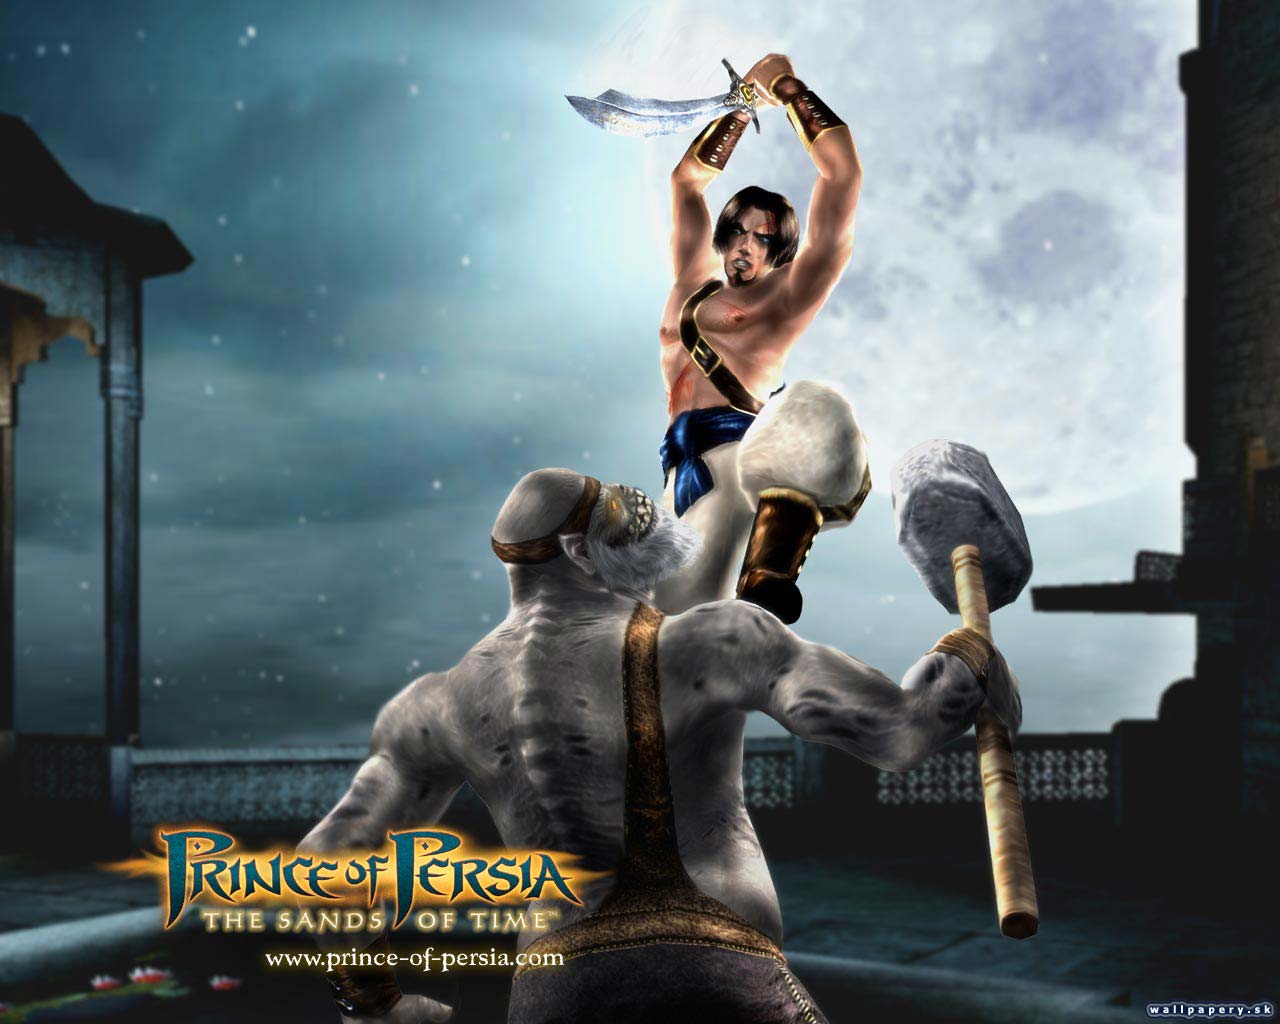 Prince of Persia: The Sands of Time - wallpaper 12